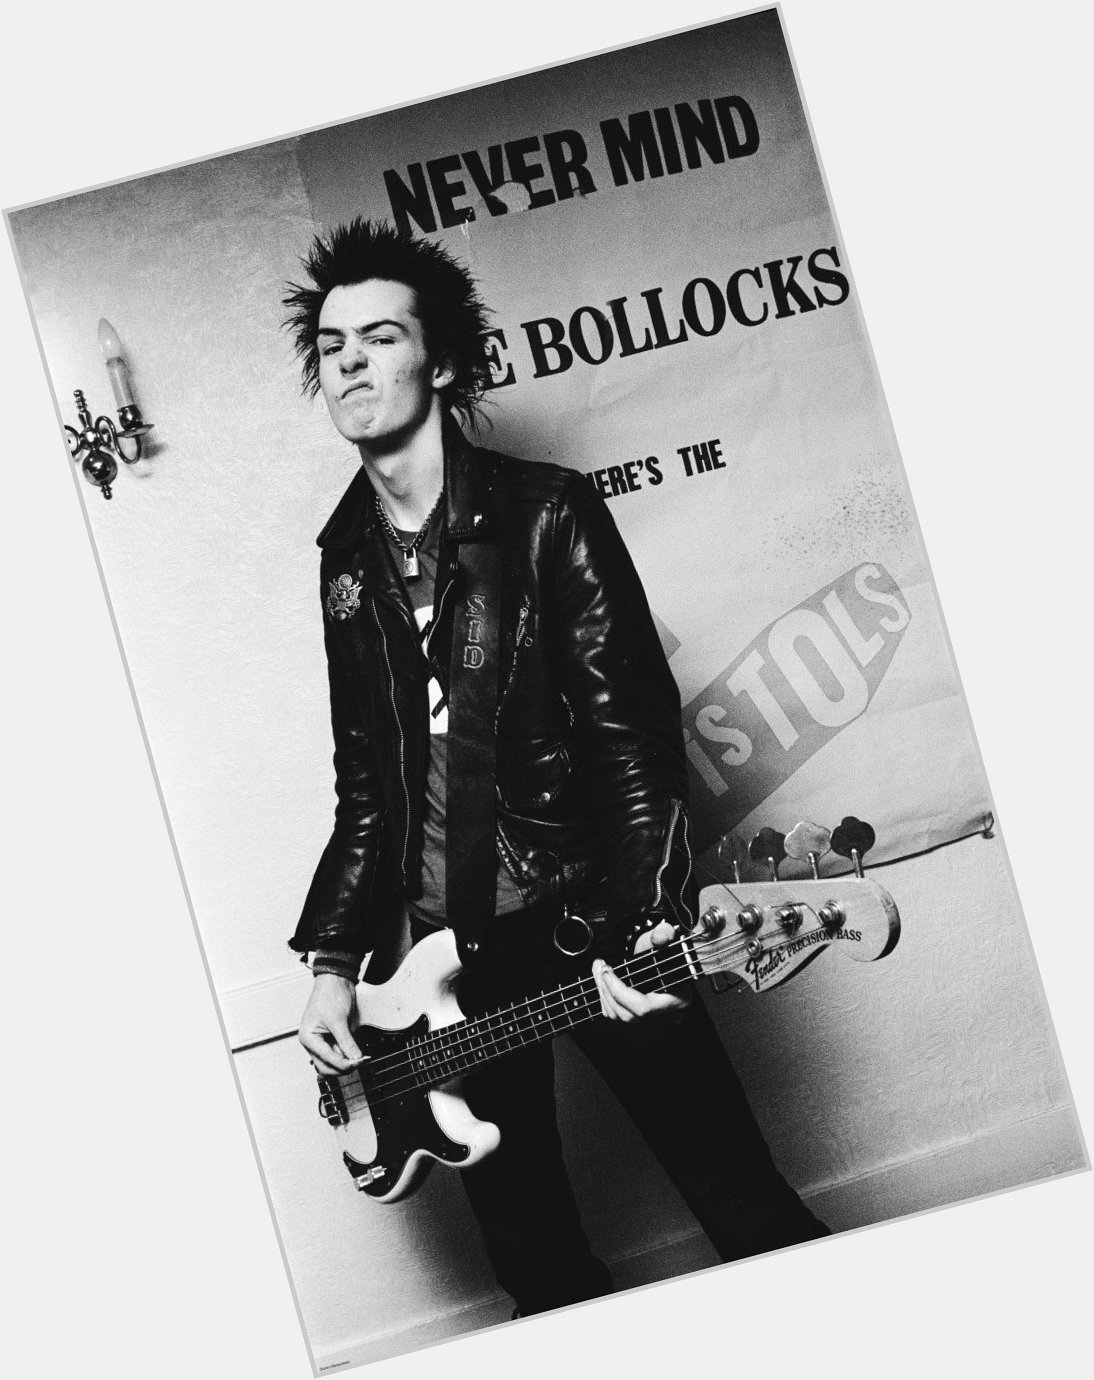 Happy birthday to John Beverly a.k.a. Sid Vicious! He would have been 60 today. 